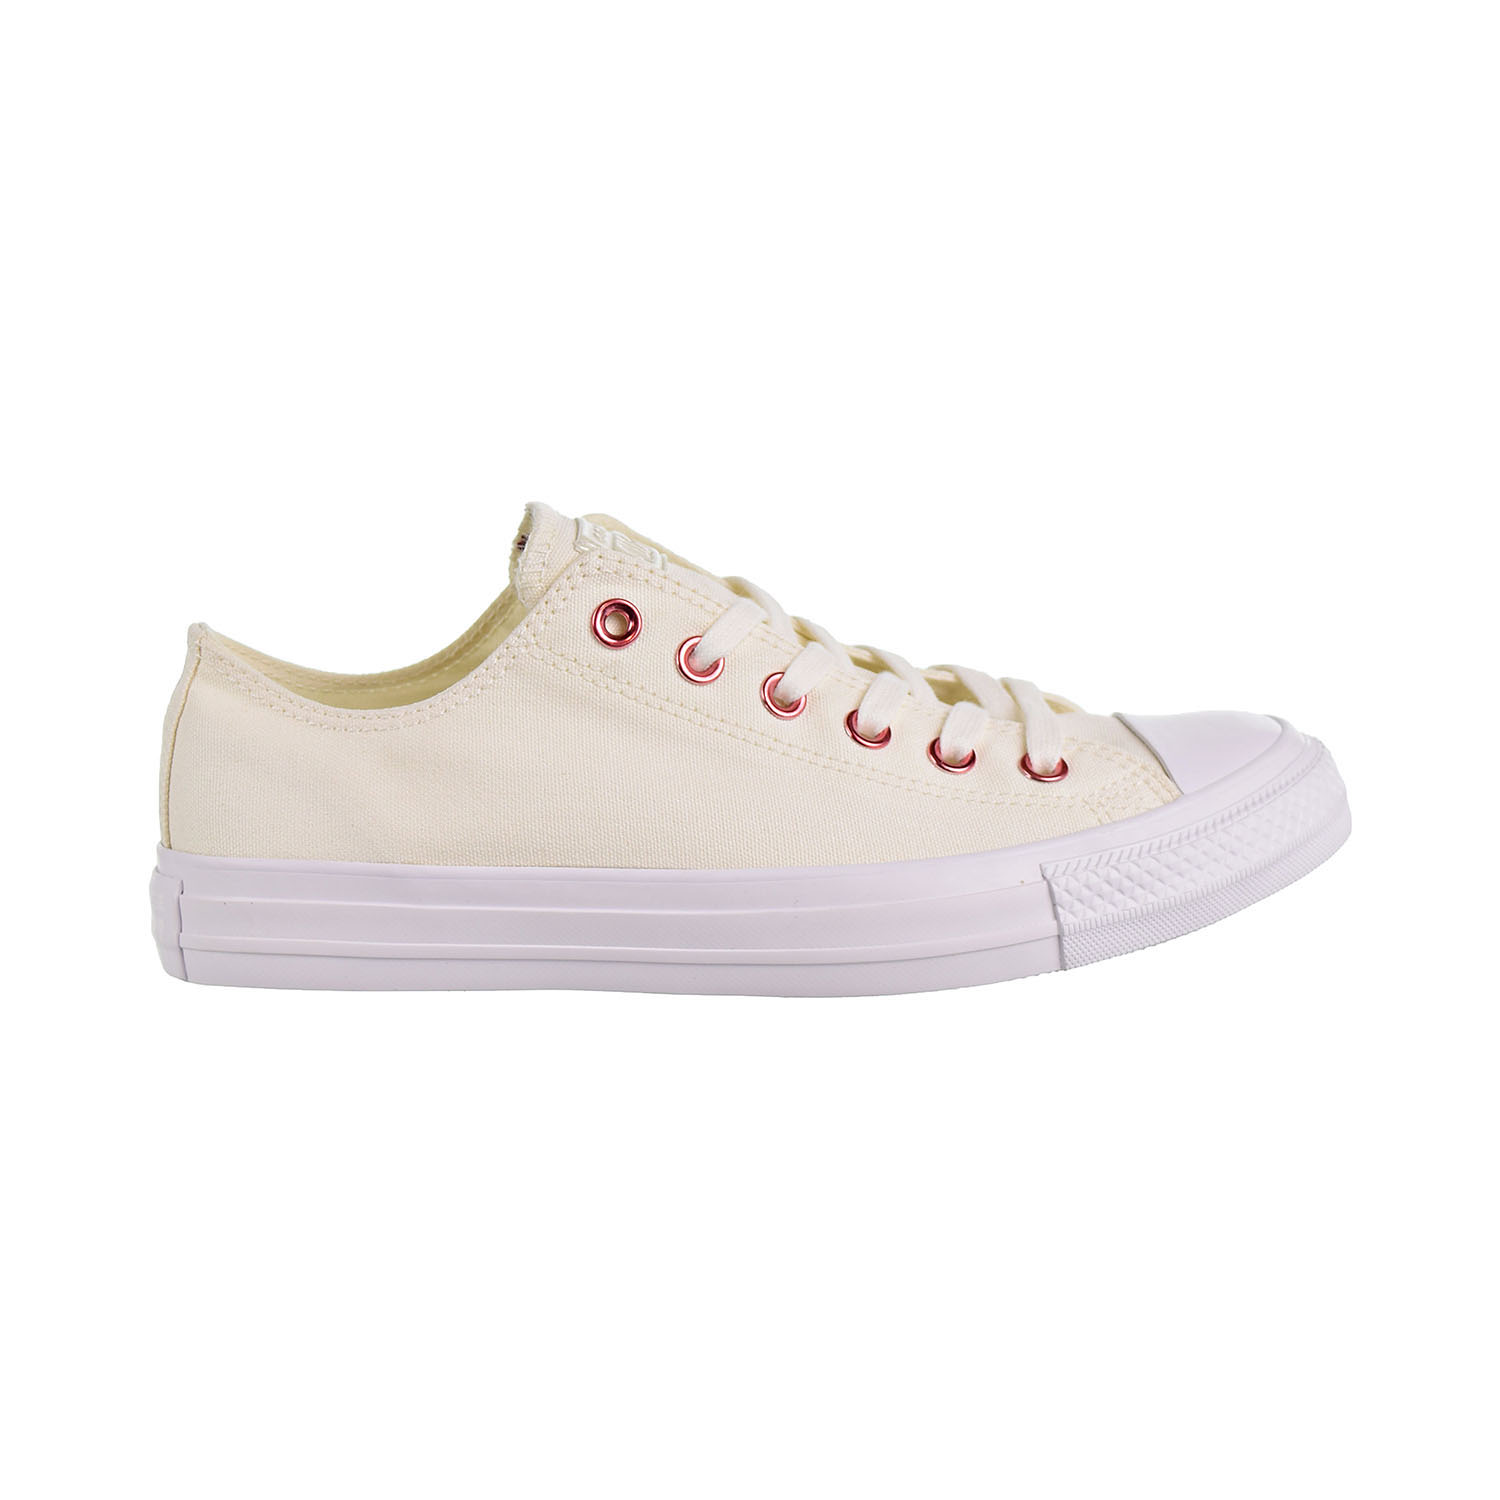 Converse Chuck Taylor All Star Ox Hearts Unisex Shoes Egret-Rhubarb-White 163283c - image 1 of 6